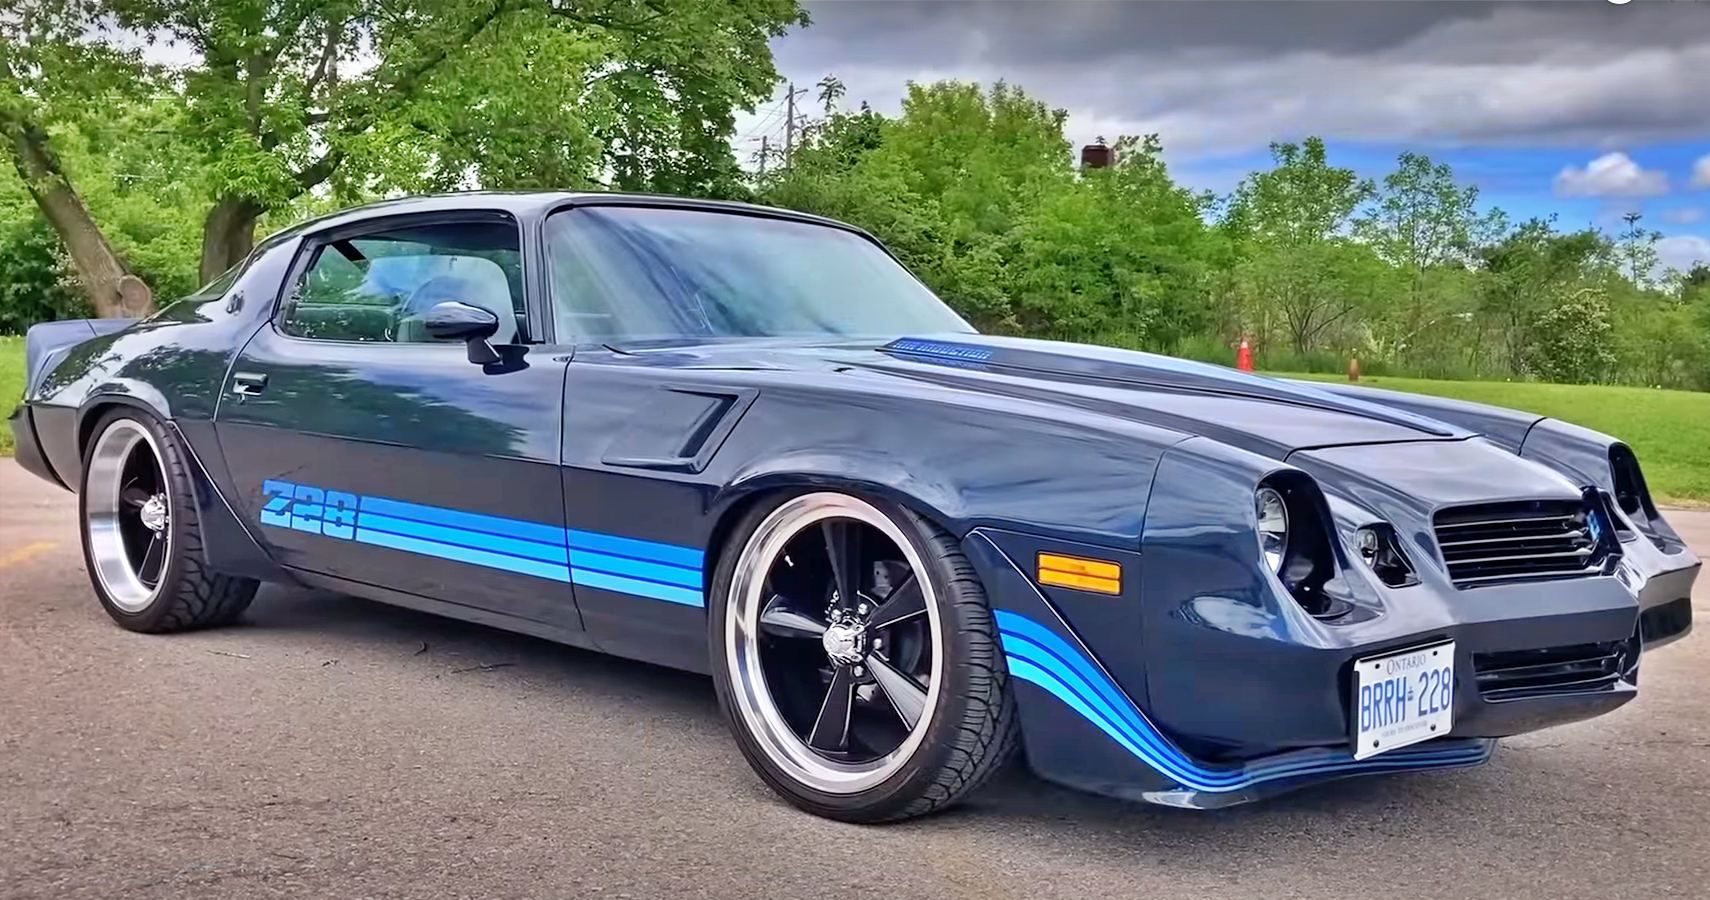 This 1980 Chevrolet Camaro Z28 Muscle Car Is A Gearhead’s Dream Come True